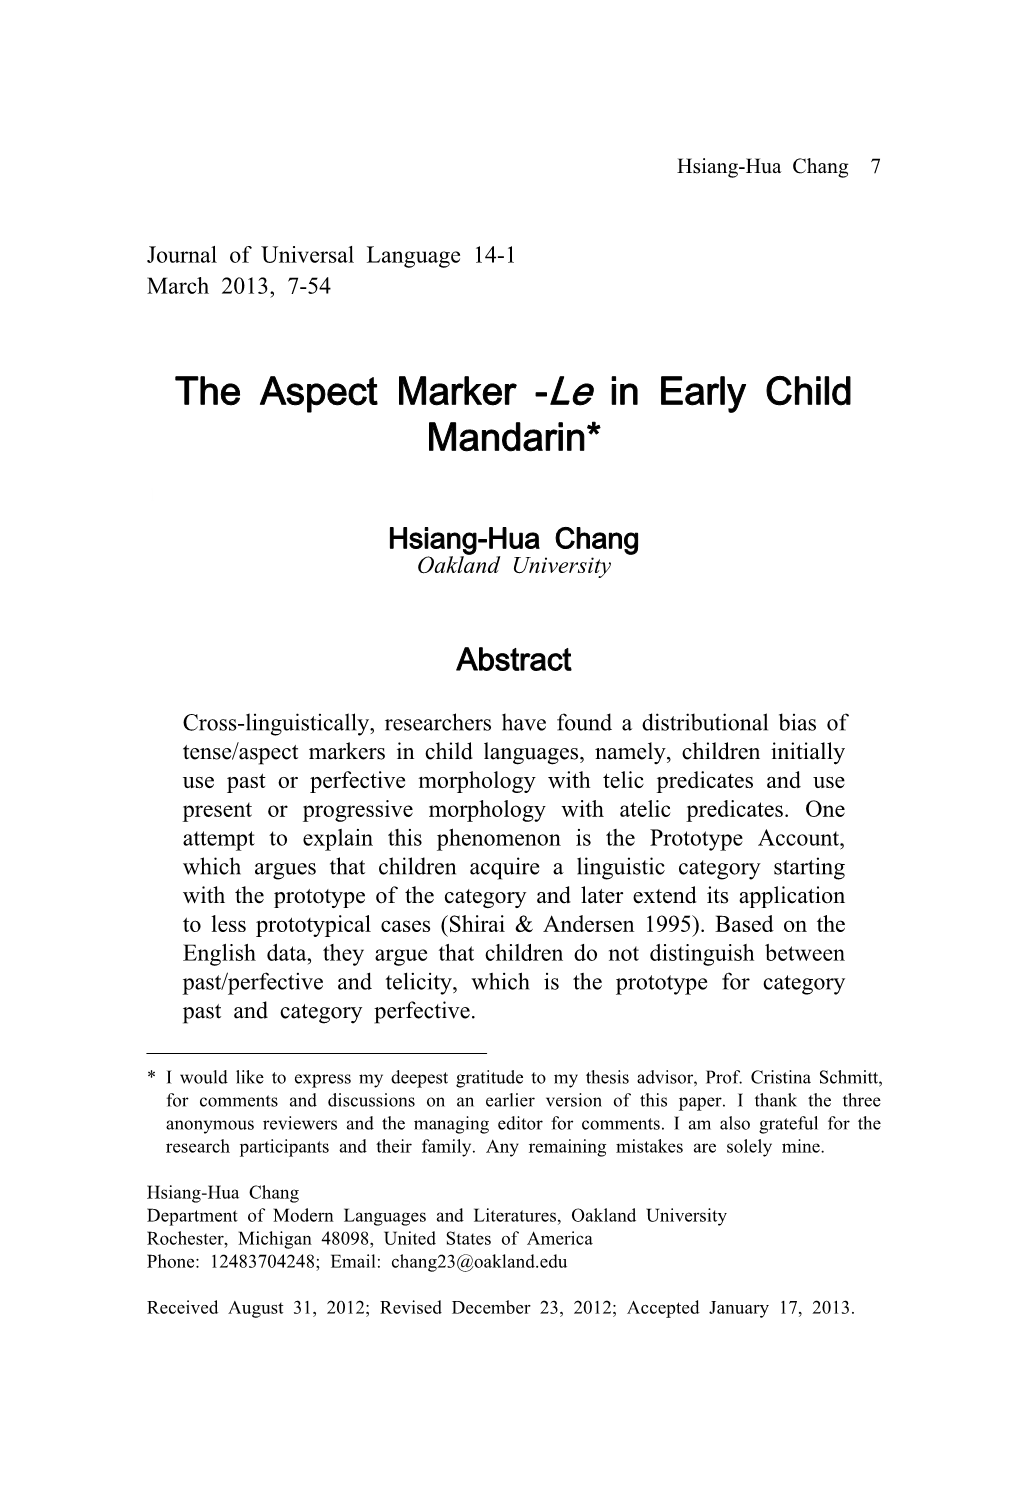 The Aspect Marker -Le in Early Child Mandarin*